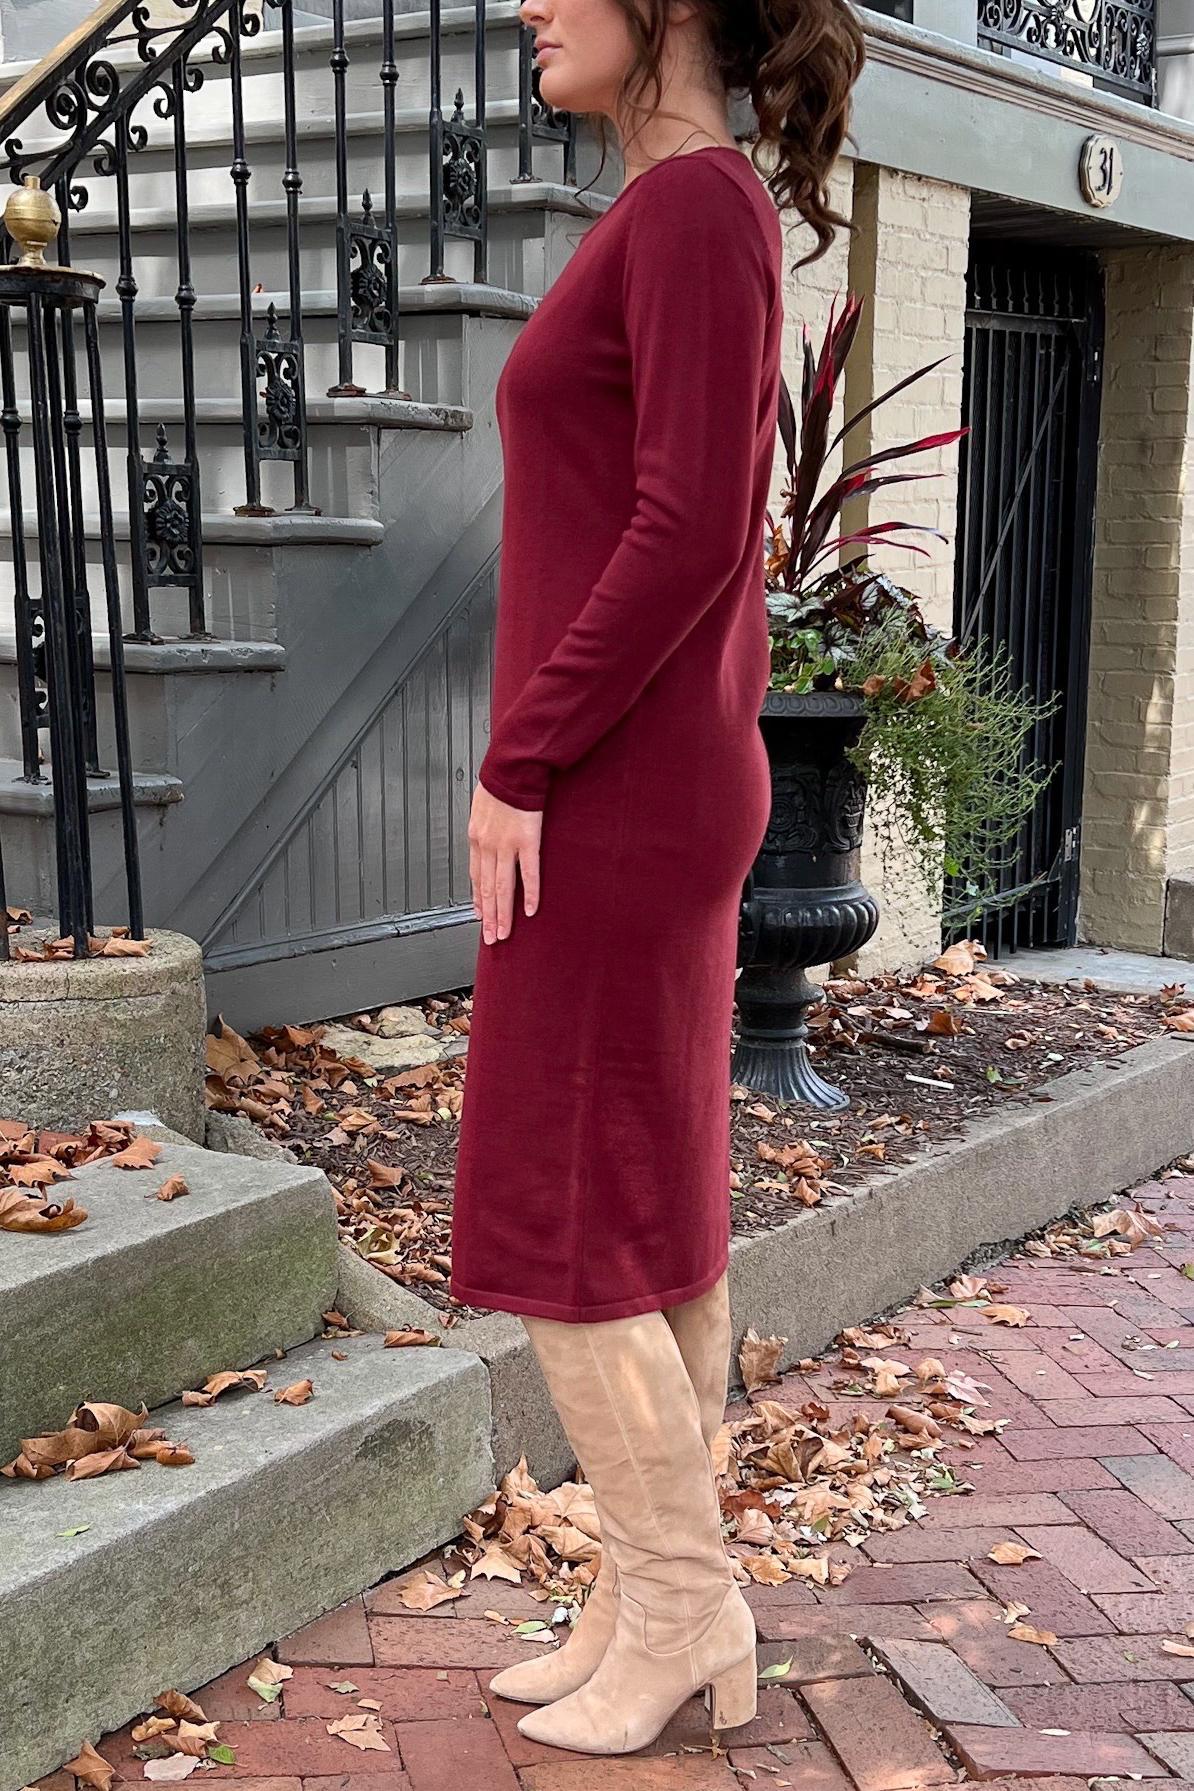 THE QUINN EVERYDAY SCOOP NECK SWEATER DRESS IN BURGUNDY